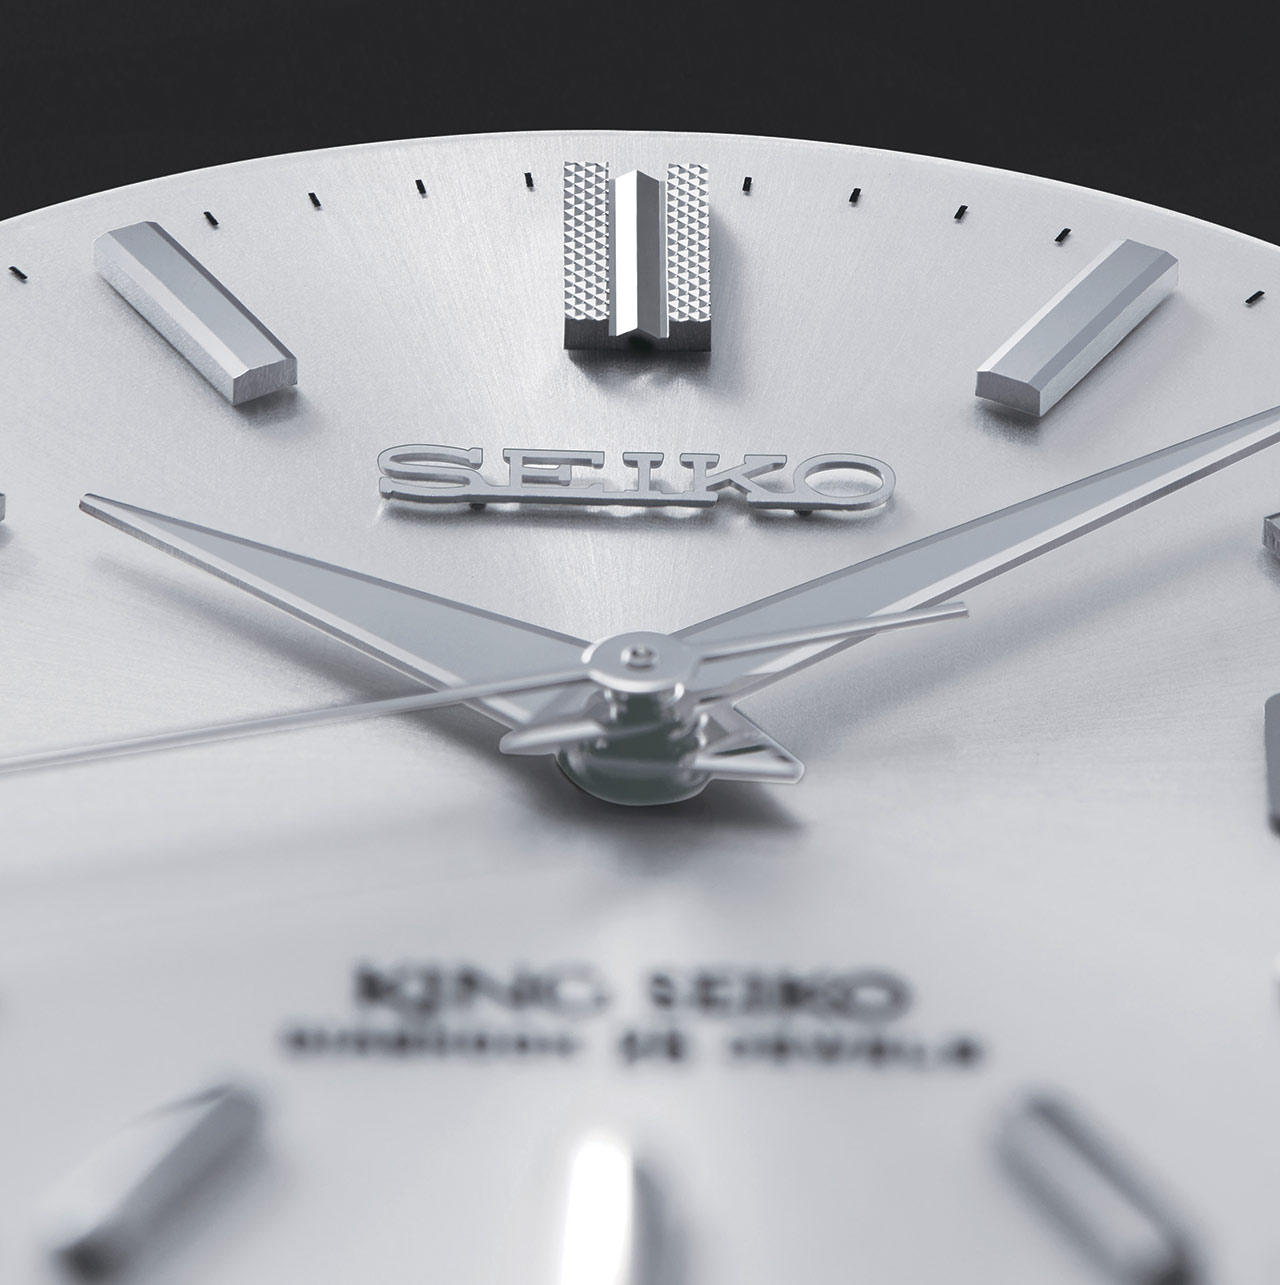 Seiko - King Seiko KSK SJE083 | Time and Watches | The watch blog